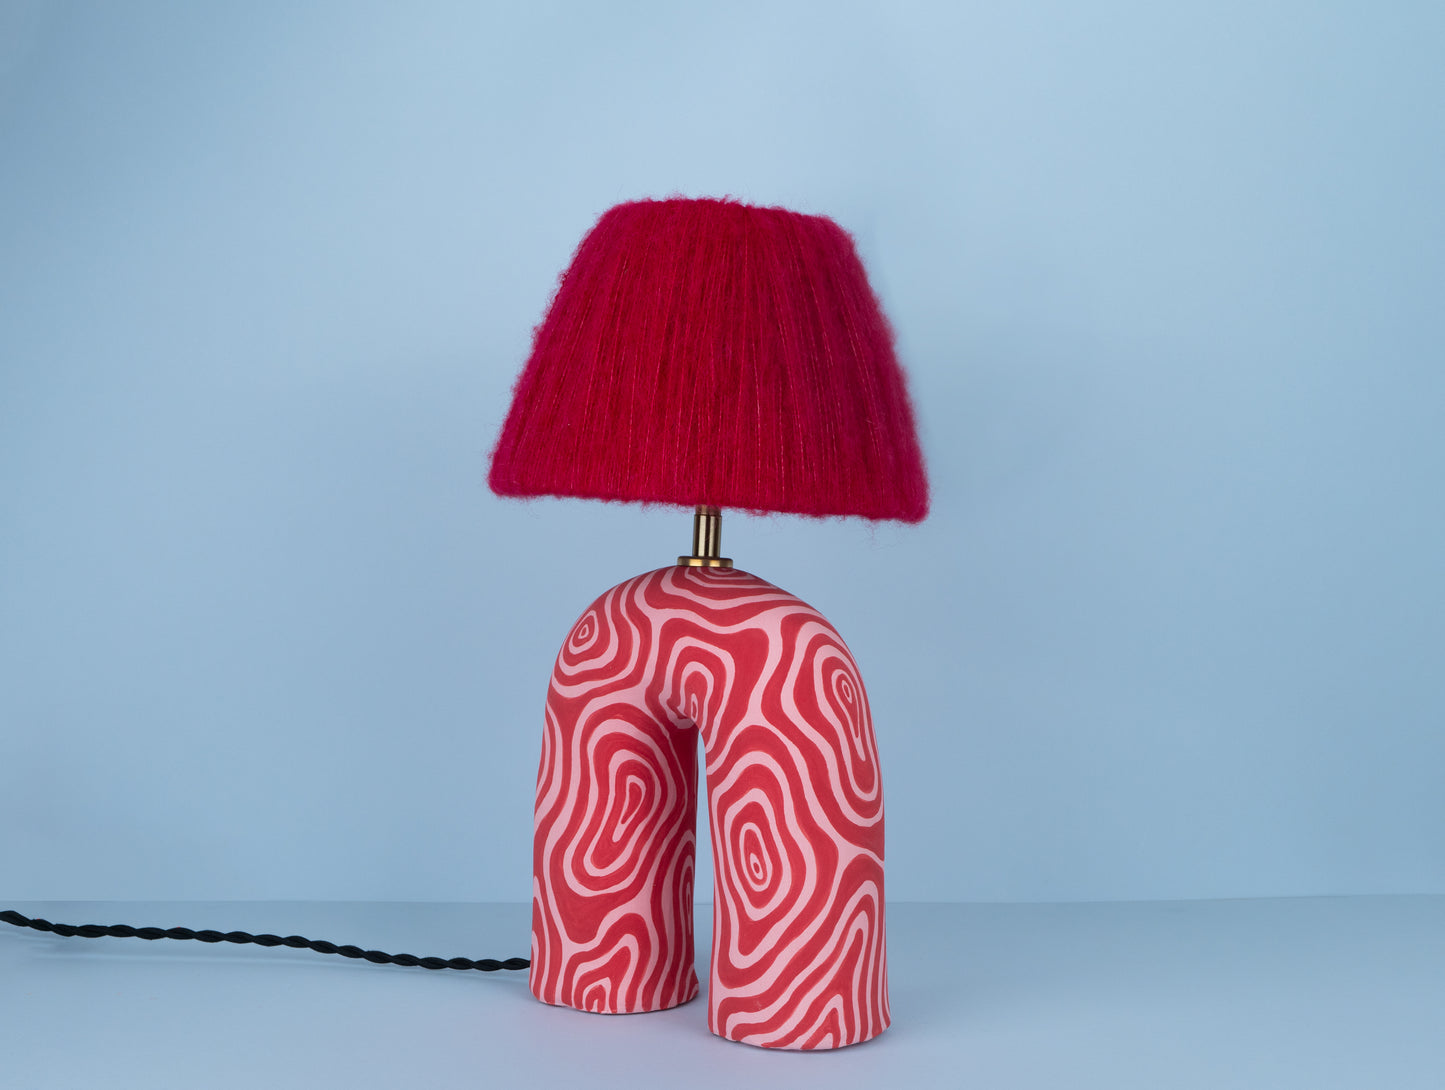 'You' Table Lamp - Red and Pink